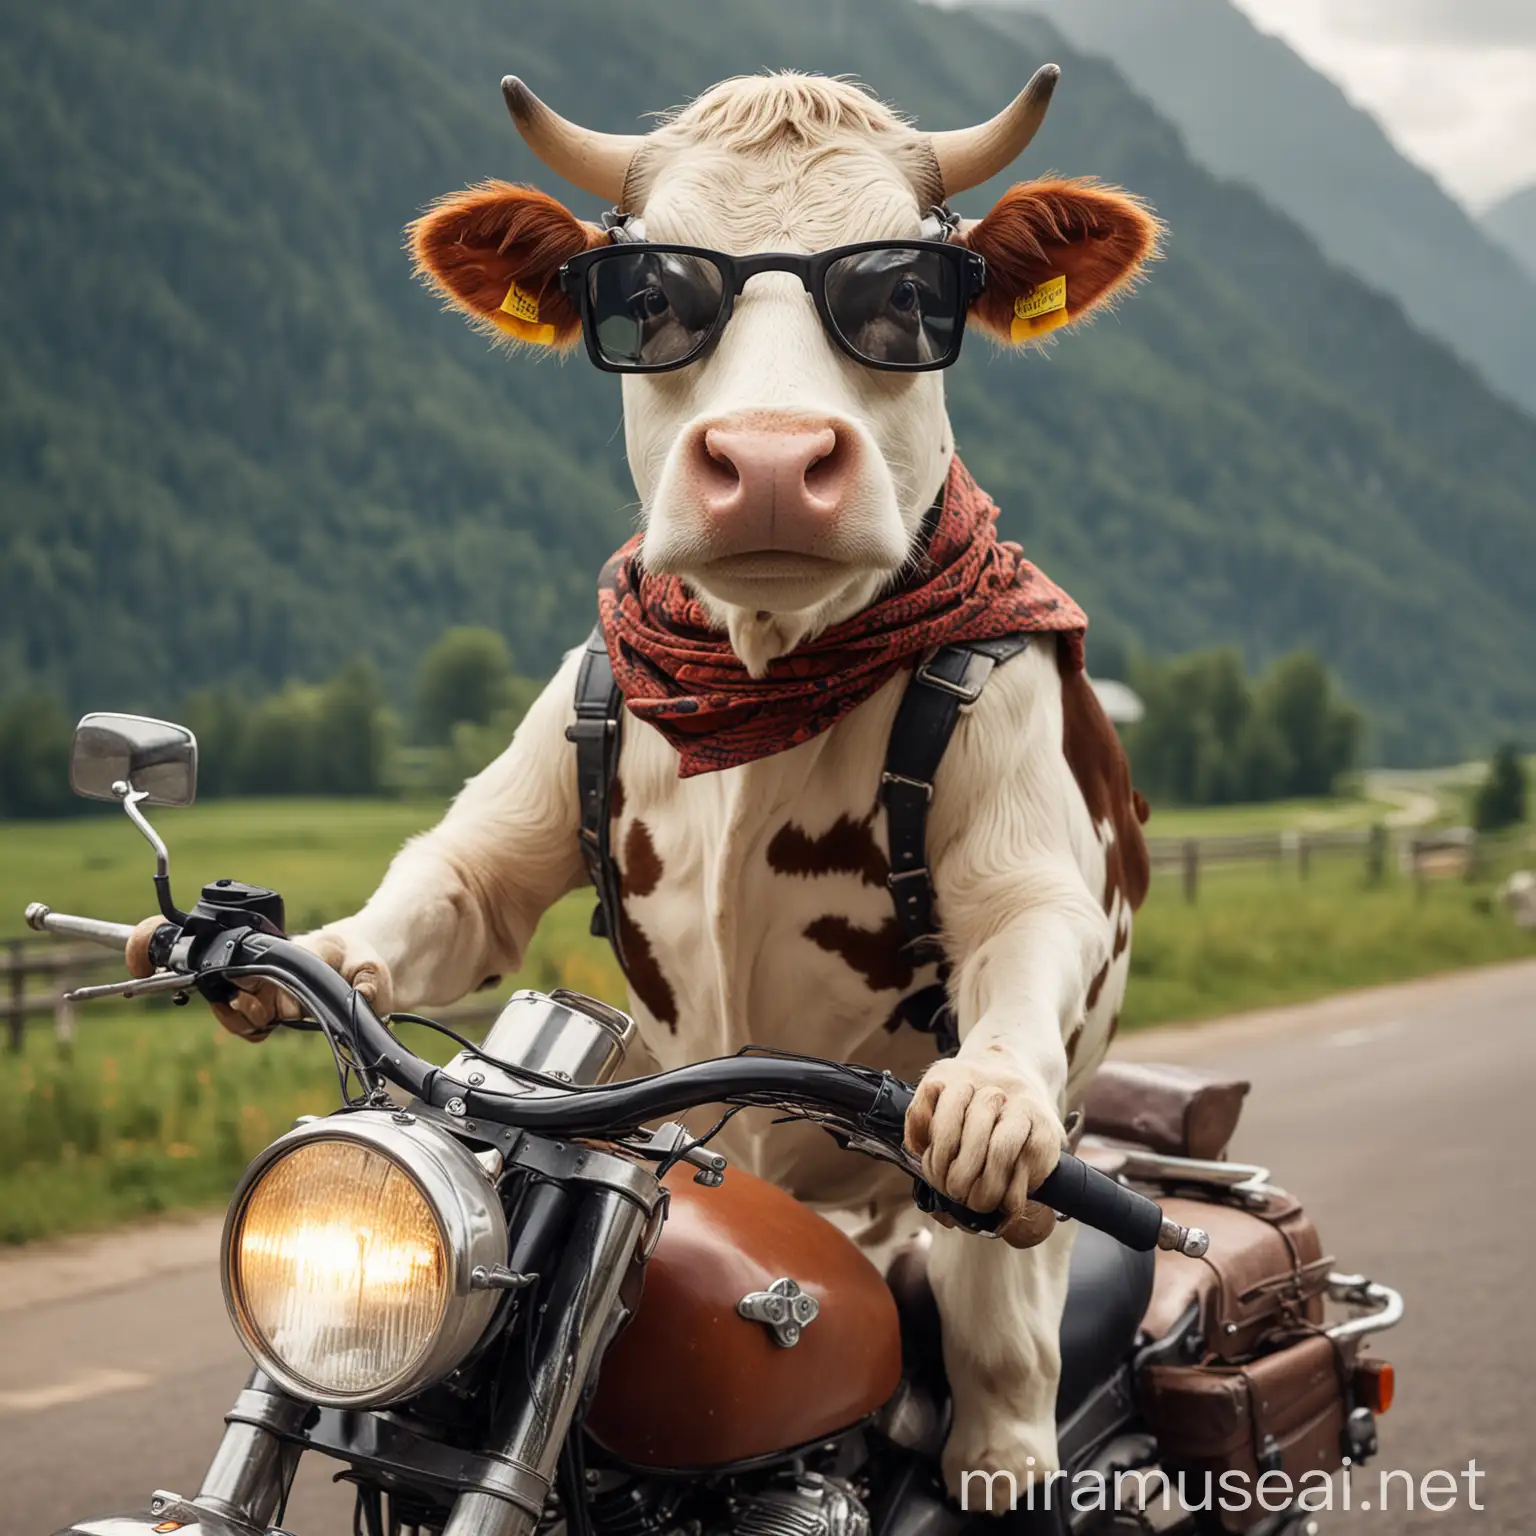 Intelligent Cow Riding Motorcycle with Stylish Glasses